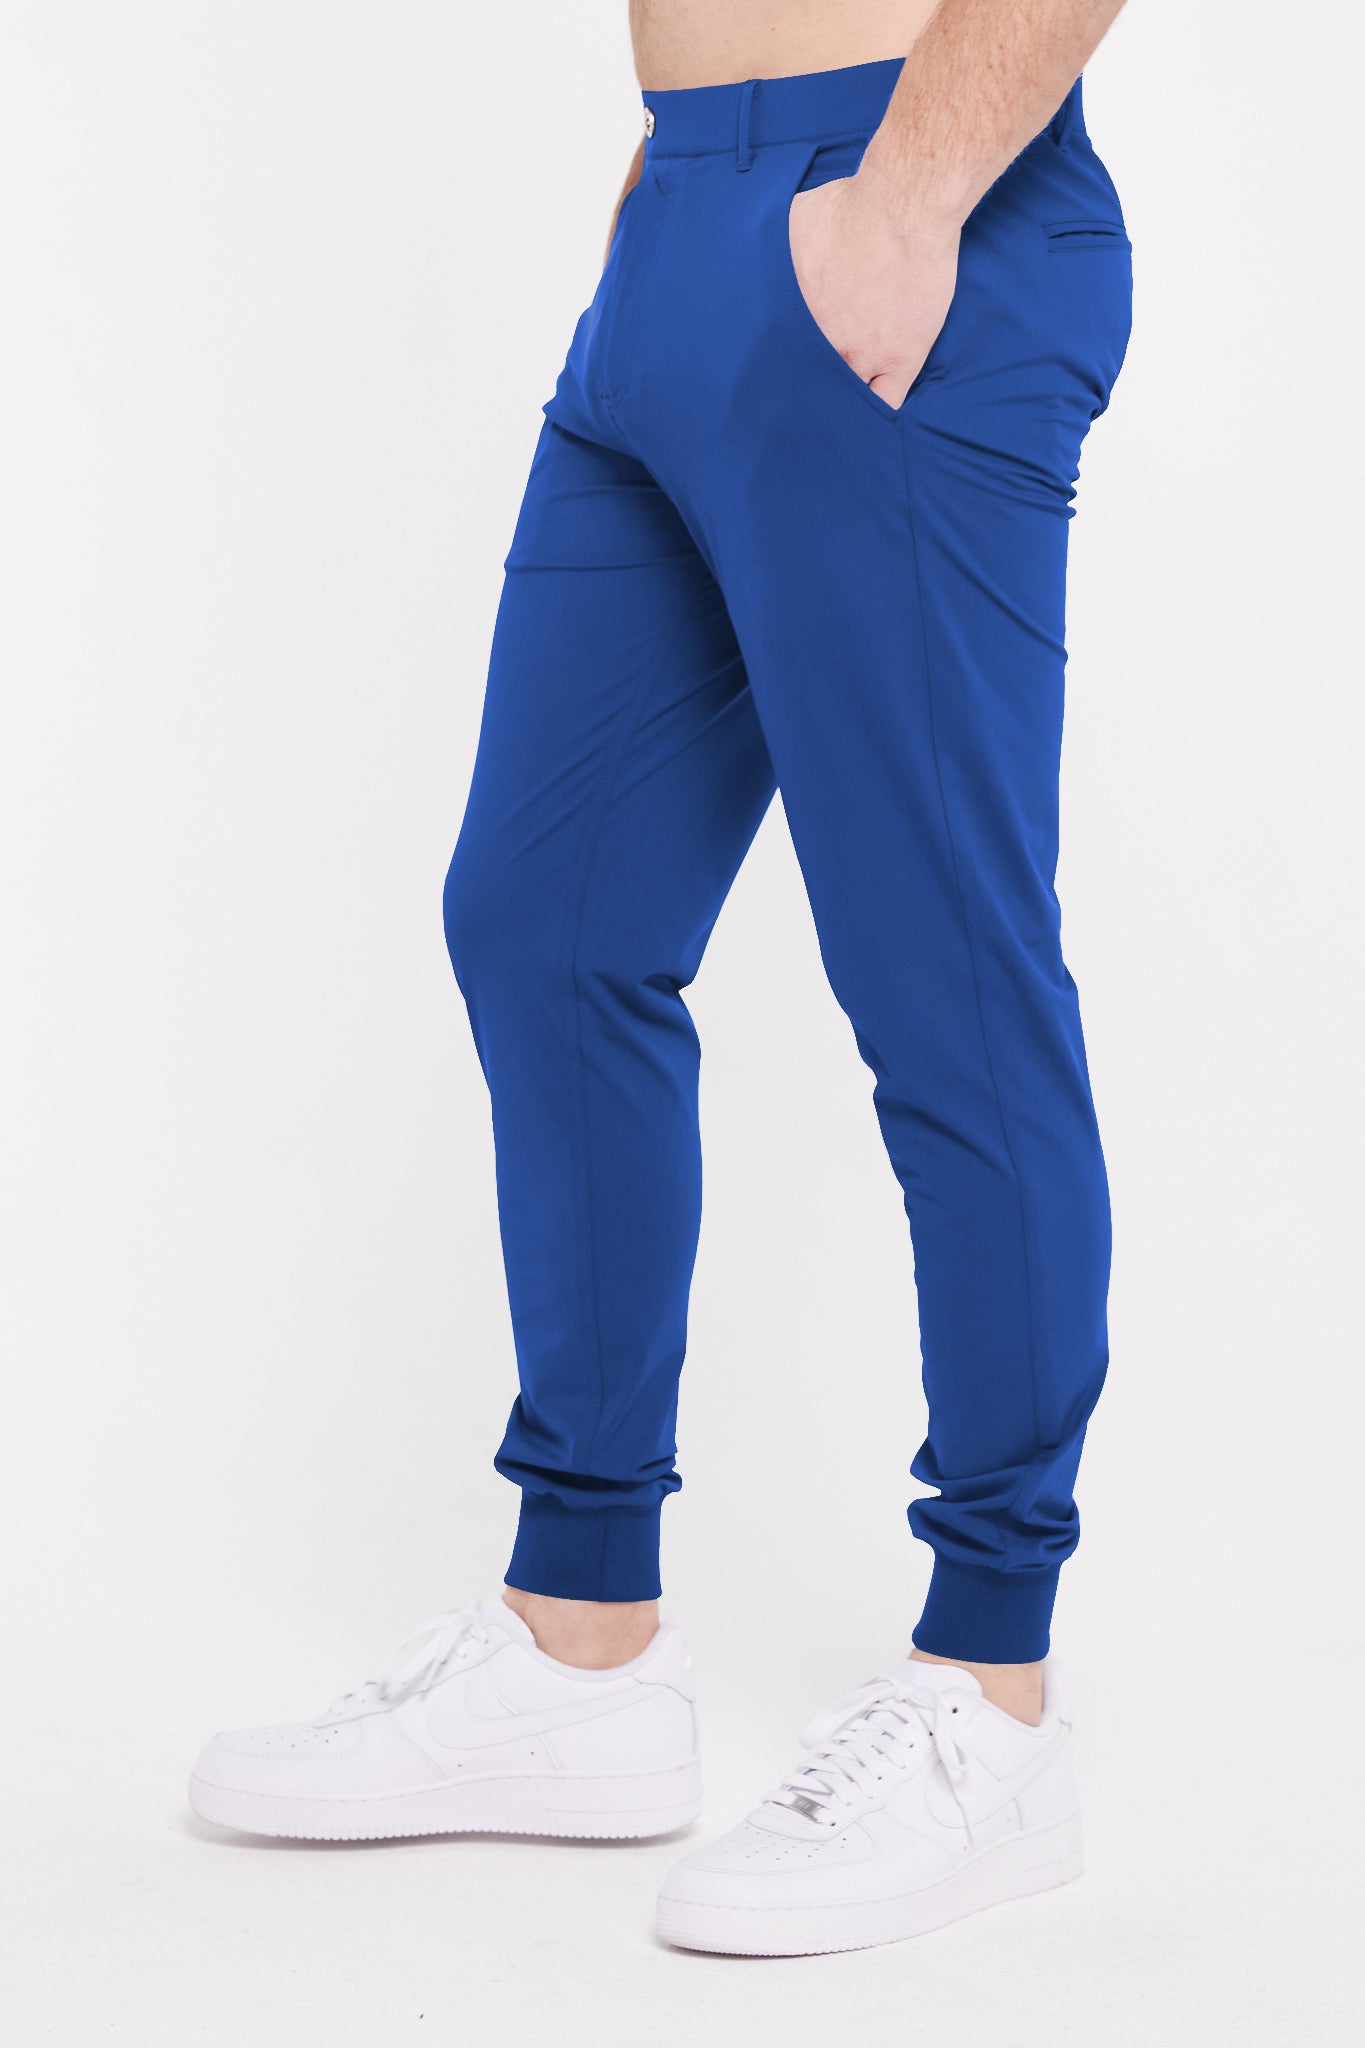 Image of the halliday pull-on jogger in classic blue